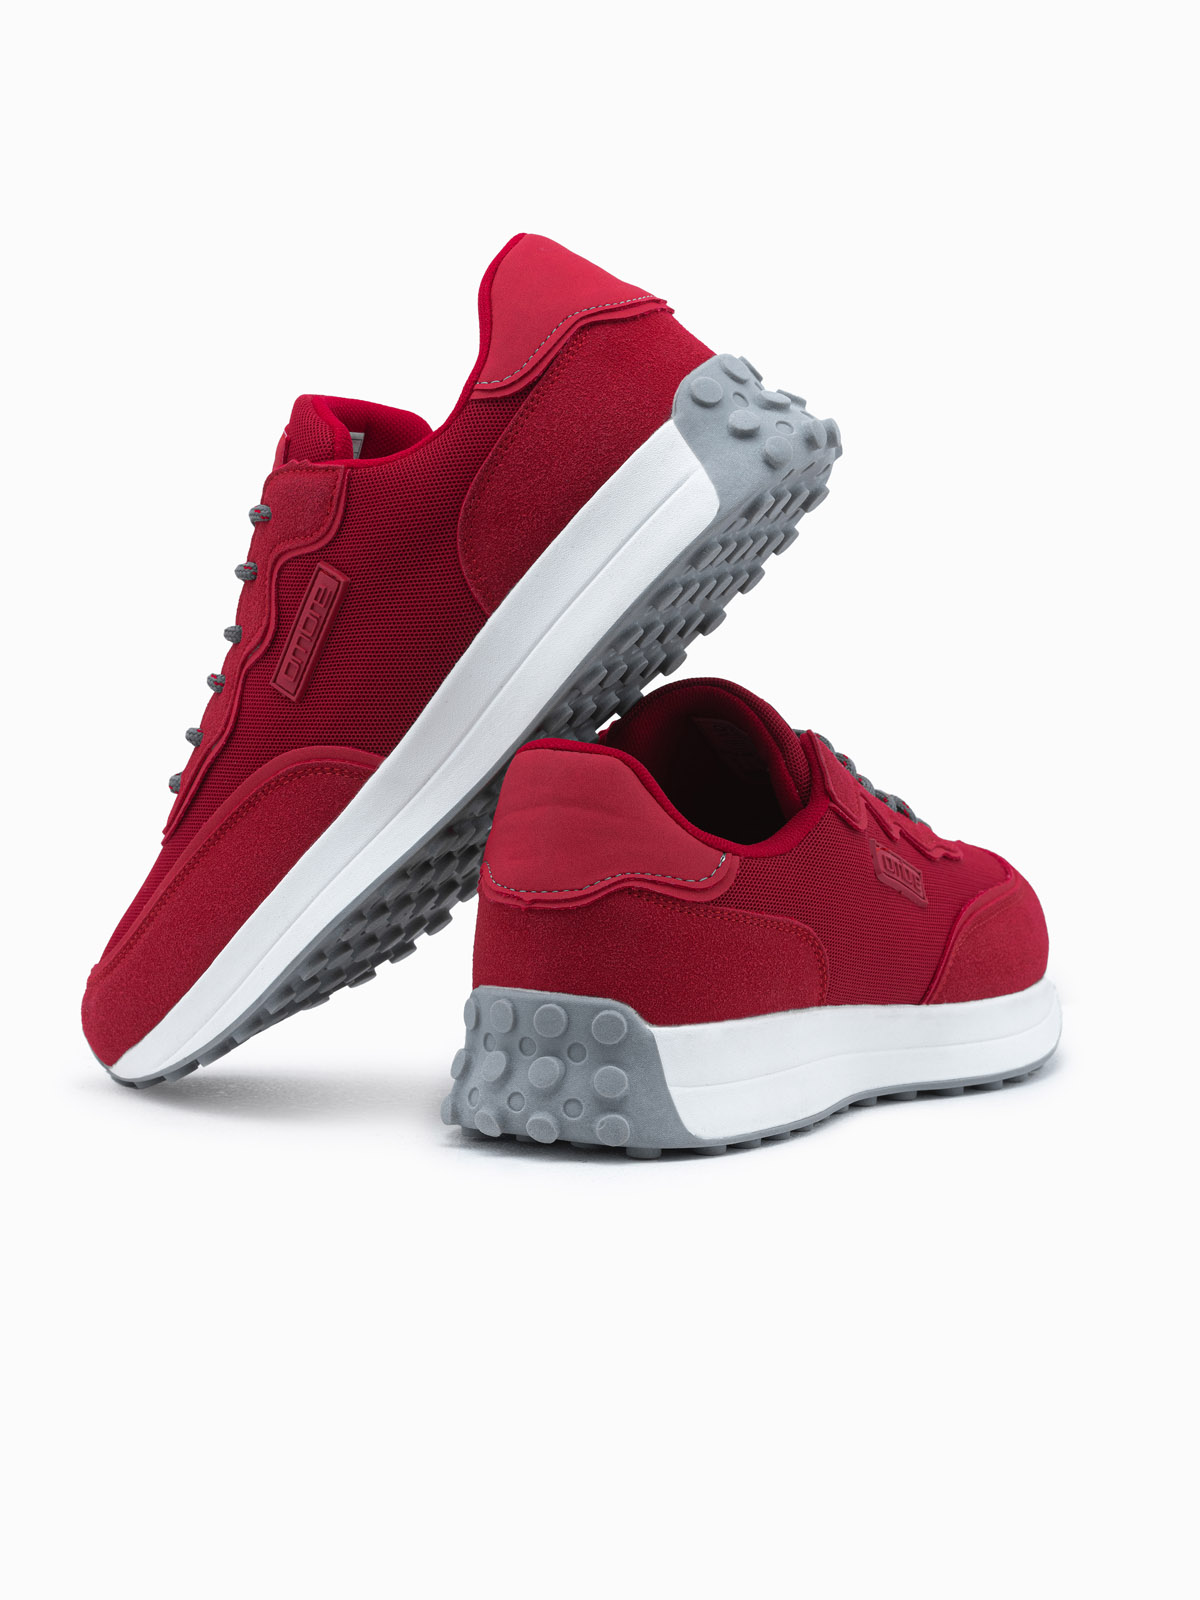 Men's shoes sneakers in combined materials - red V2 OM-FOSL-0110 ...